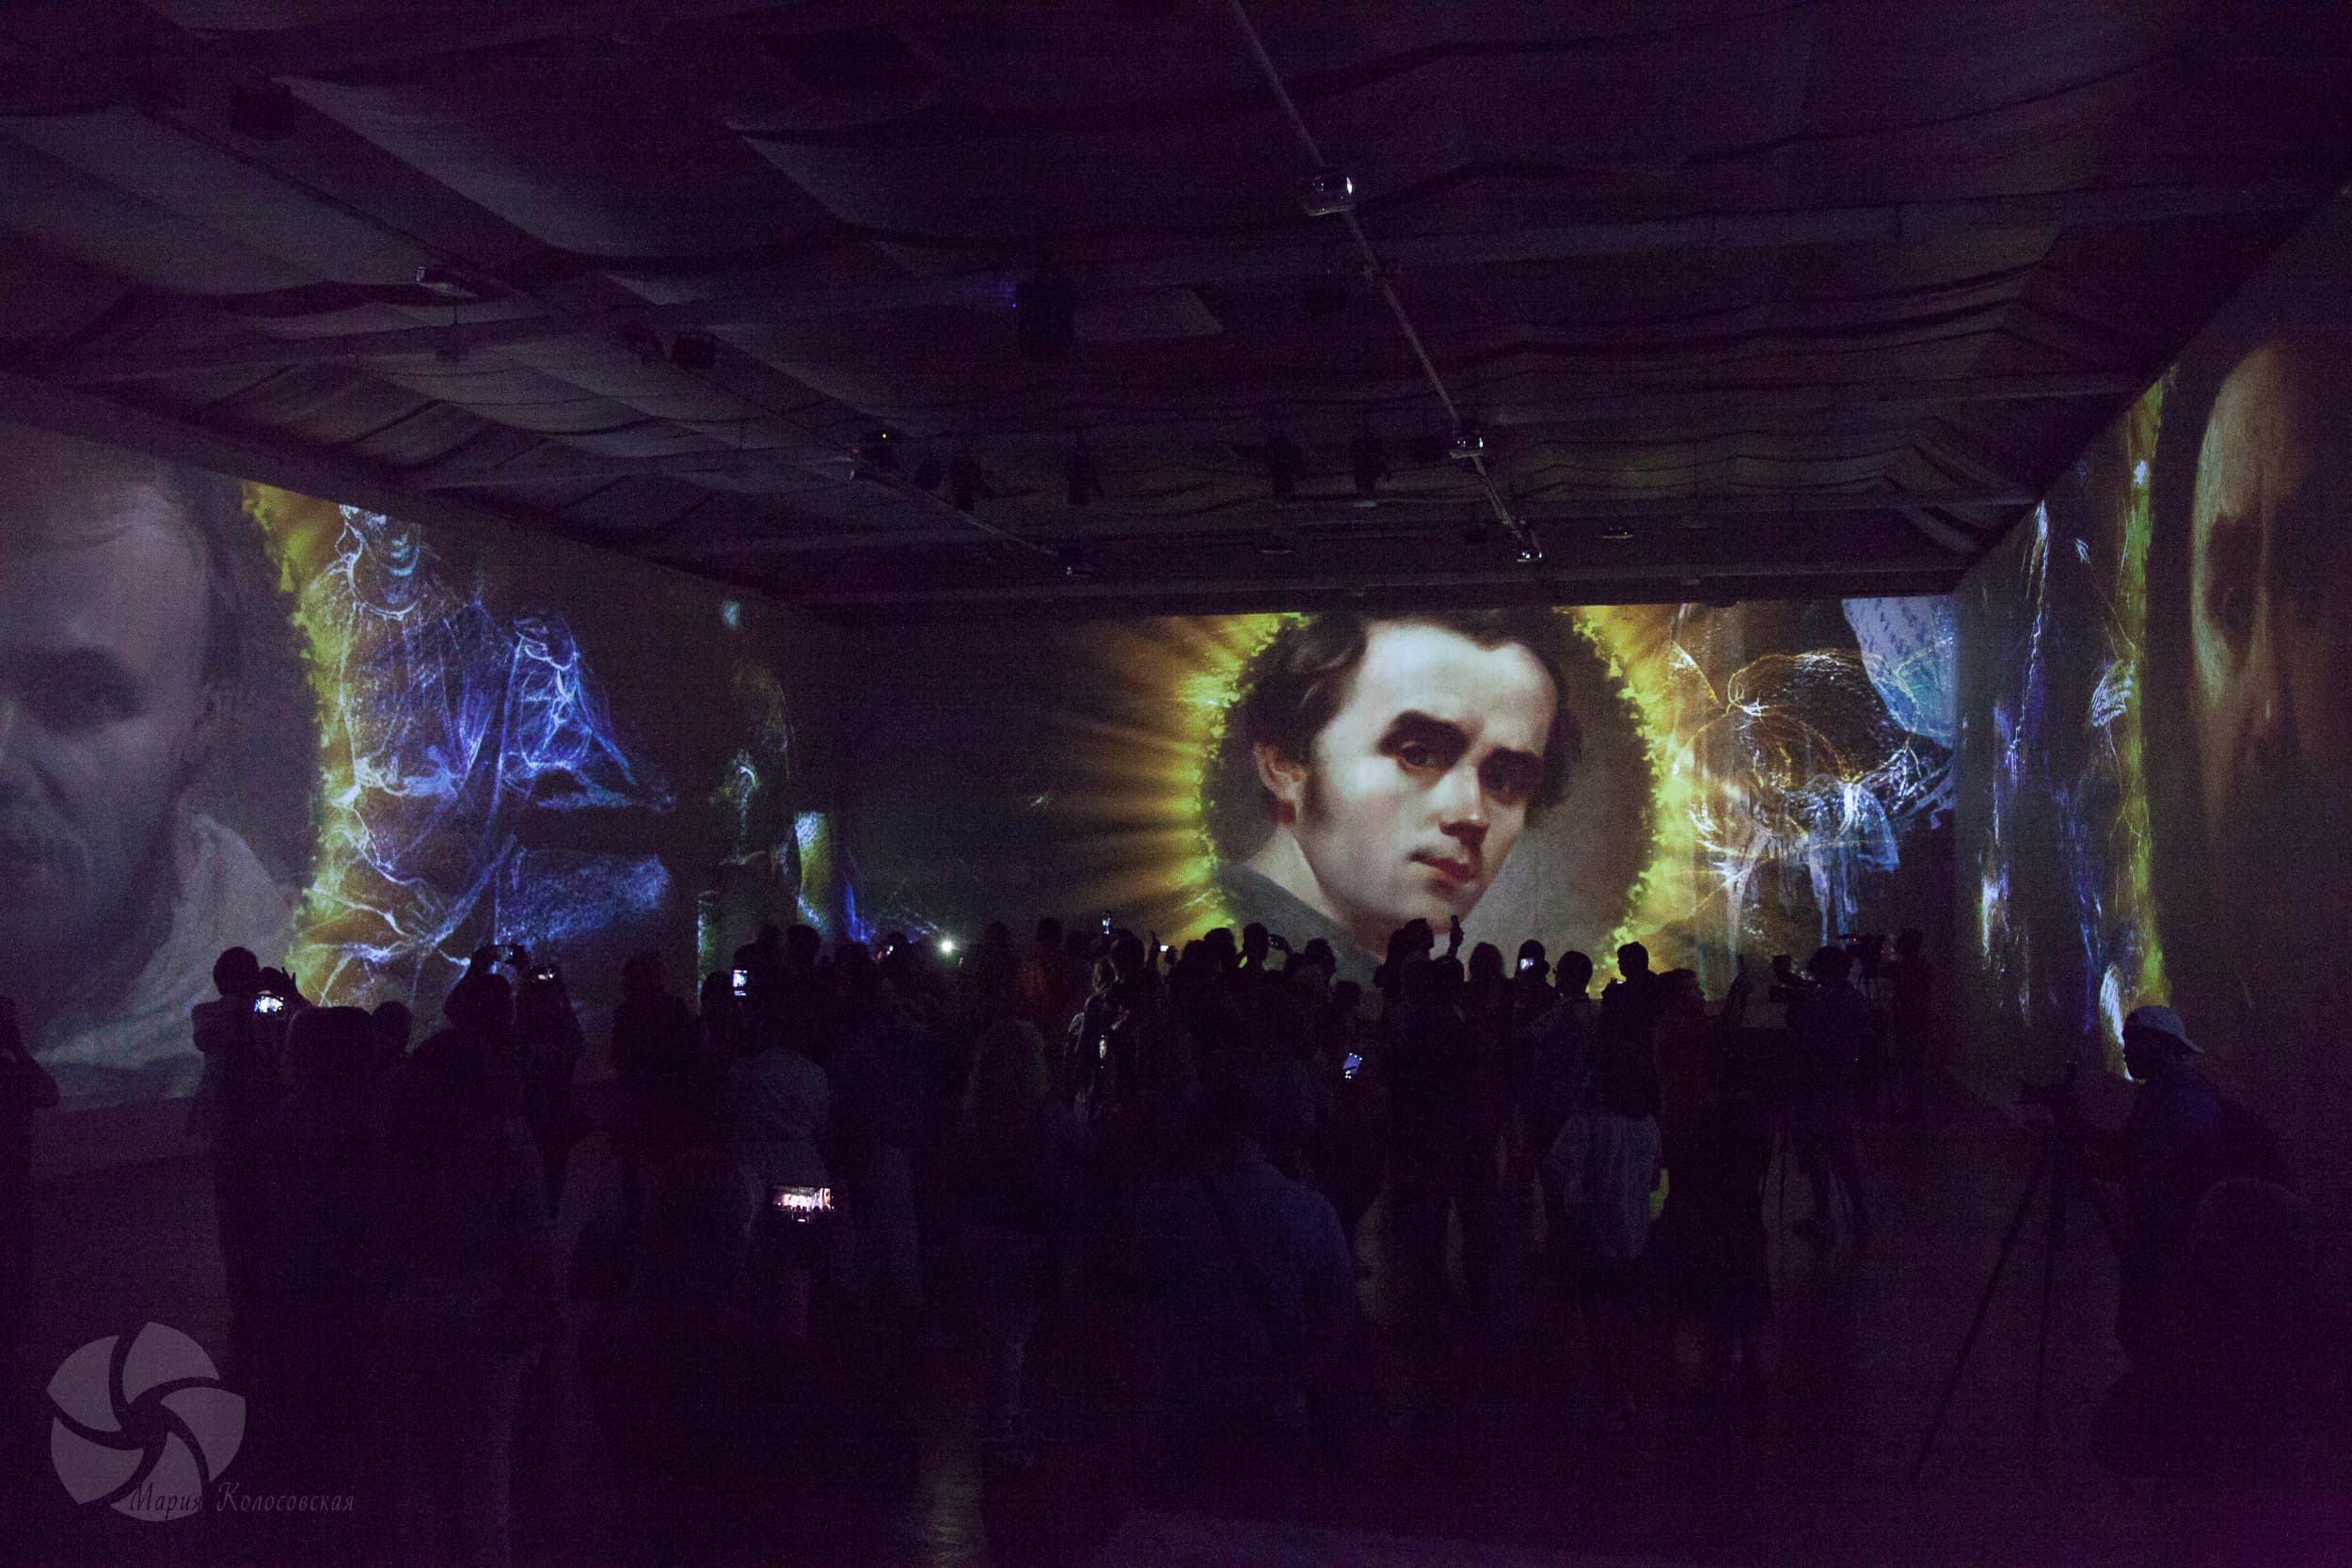 &quot;Immersive Shevchenko: Soul of Ukraine&quot; opened a special one-day Boston screening Tuesday featuring works by the 19th-century Ukrainian poet and artist Taras Shevchenko. (Courtesy of Lighthouse Immersive)